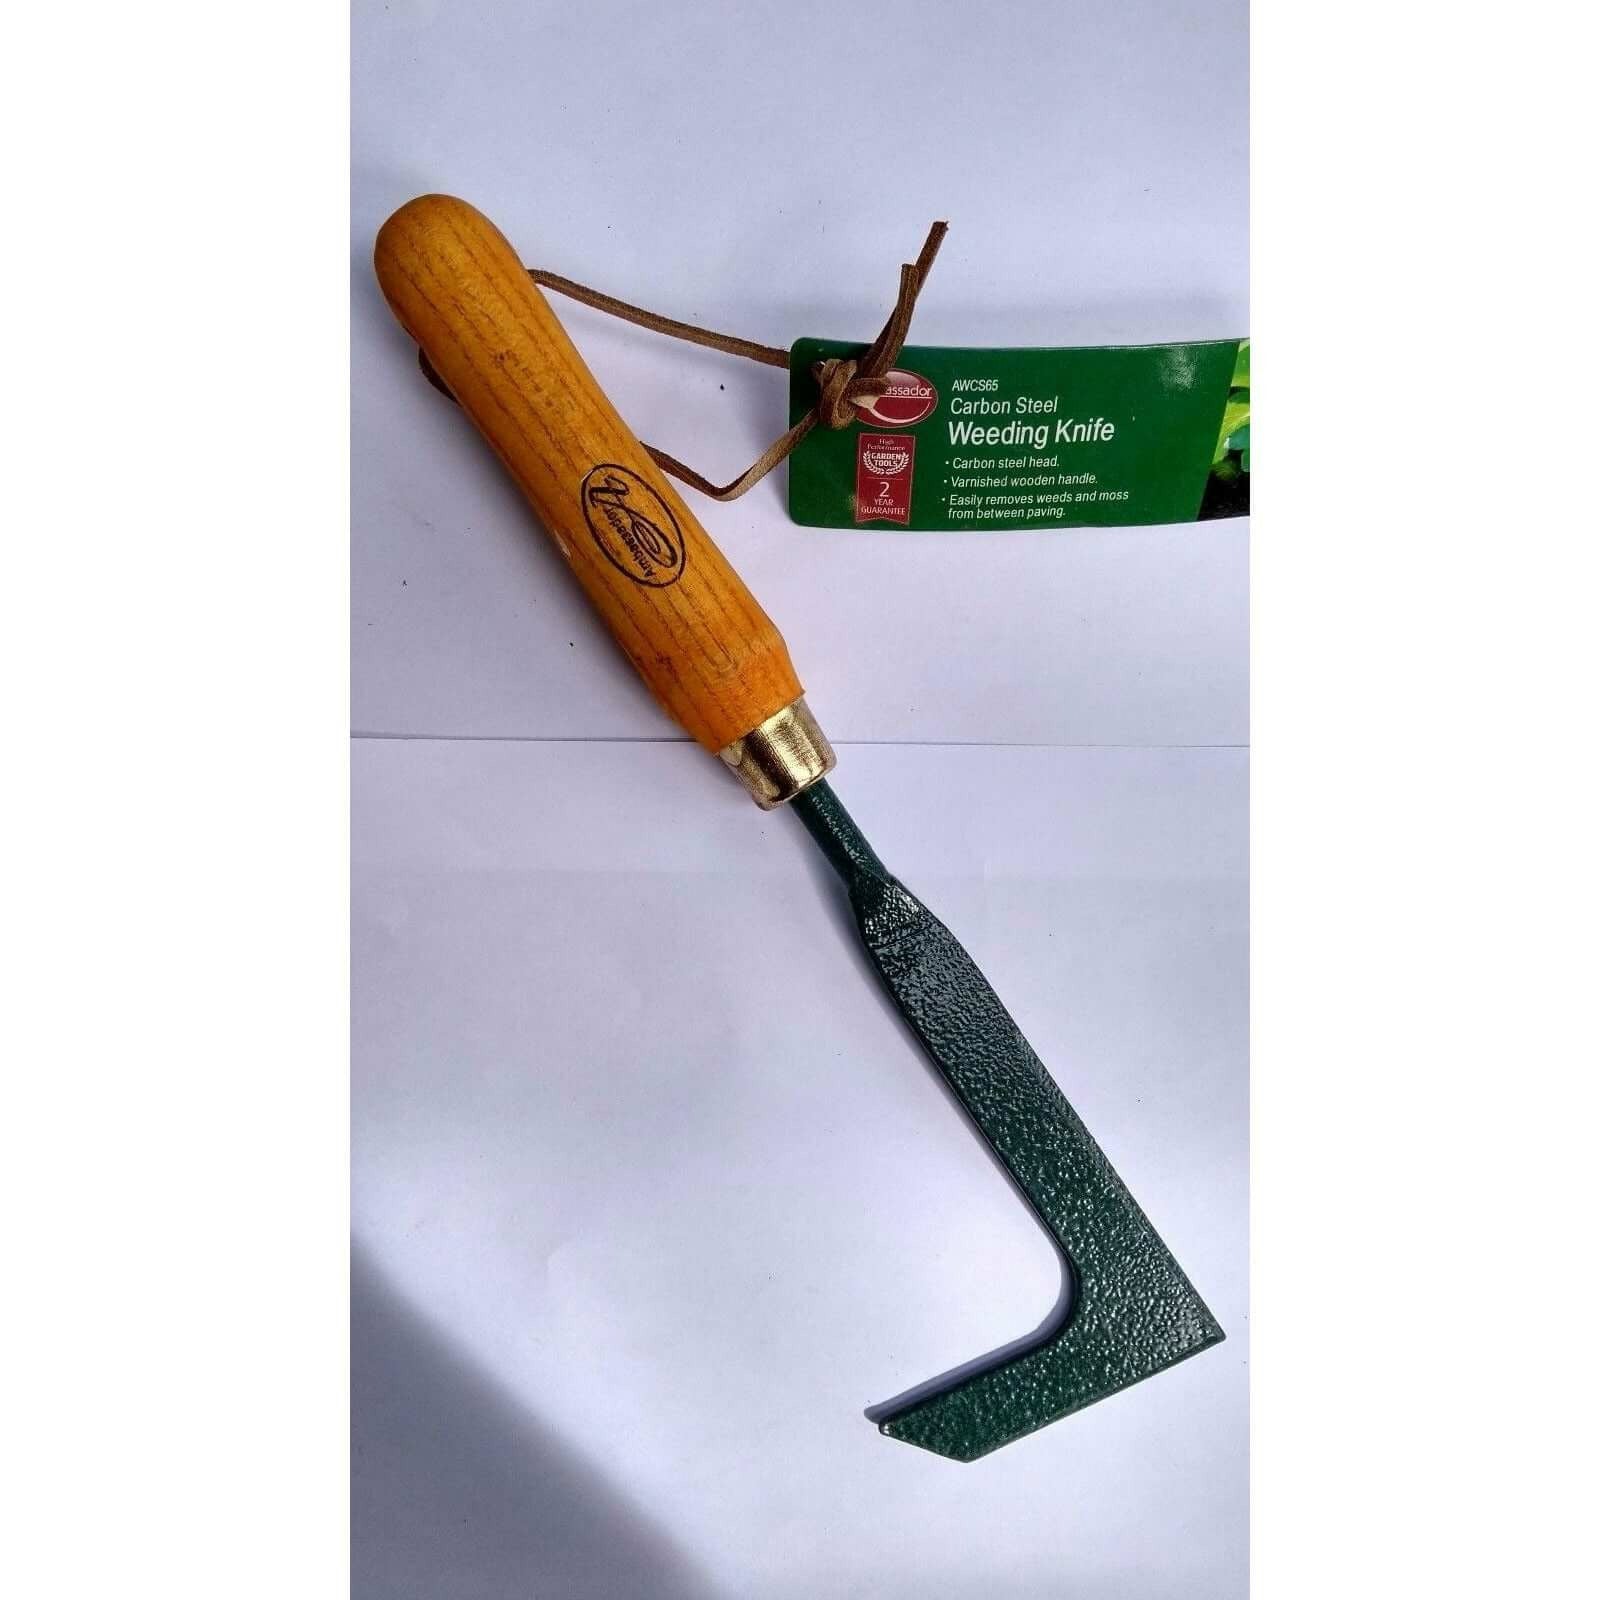 Hand Weeding tool, strong construction, varnished wooden handle  from Gardening Requisites 5.79